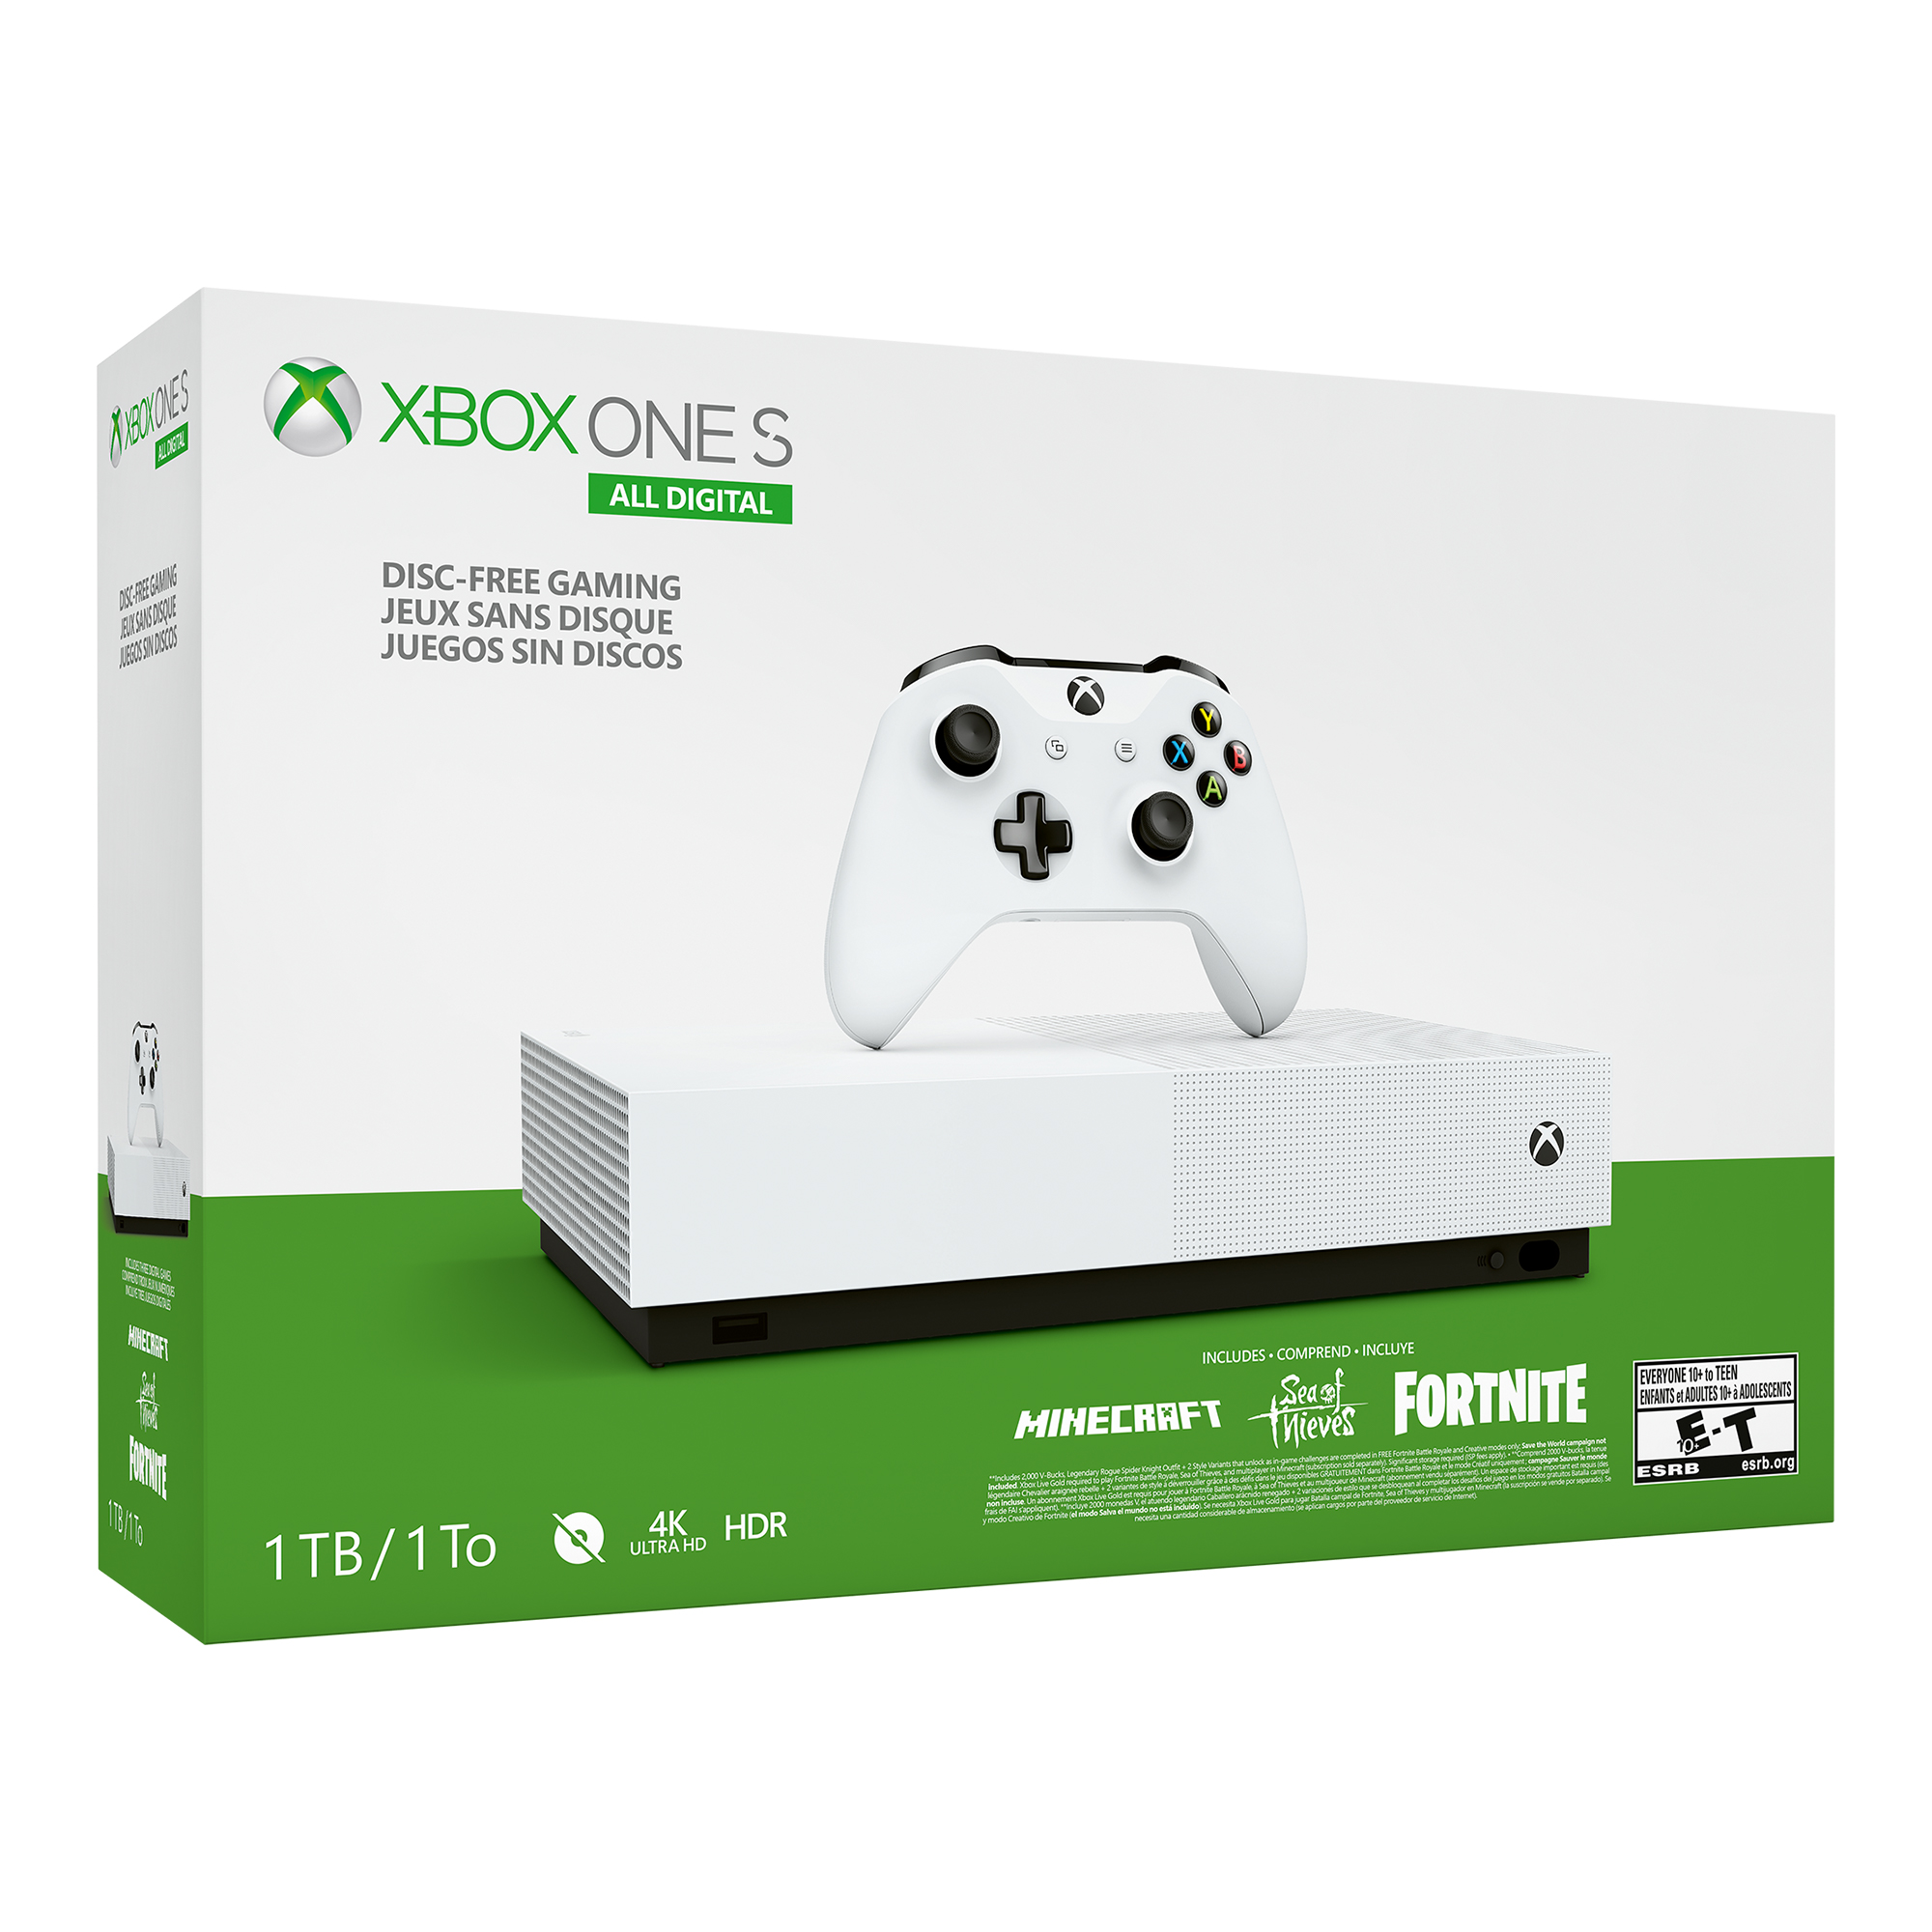 Microsoft Xbox One S 1TB All Digital Edition 3 Game Bundle (Disc-free Gaming), White, NJP-00050 - image 5 of 13